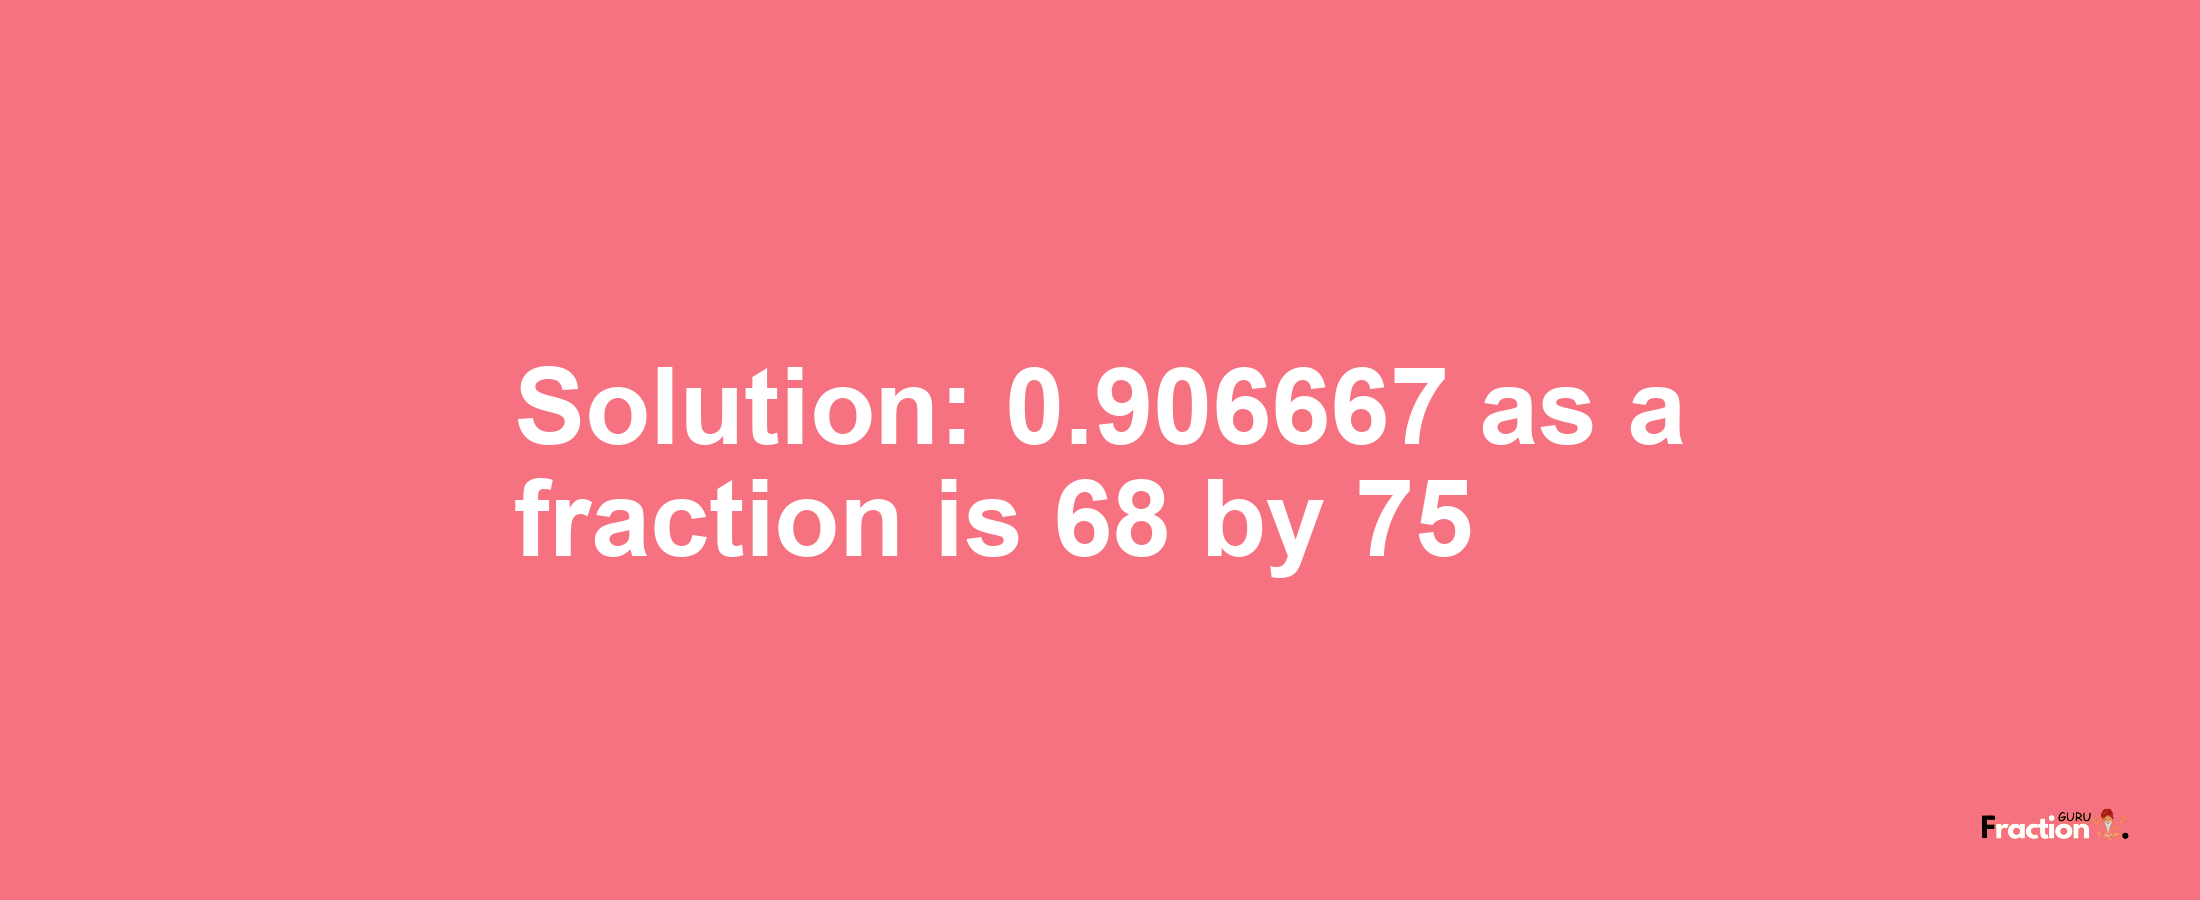 Solution:0.906667 as a fraction is 68/75